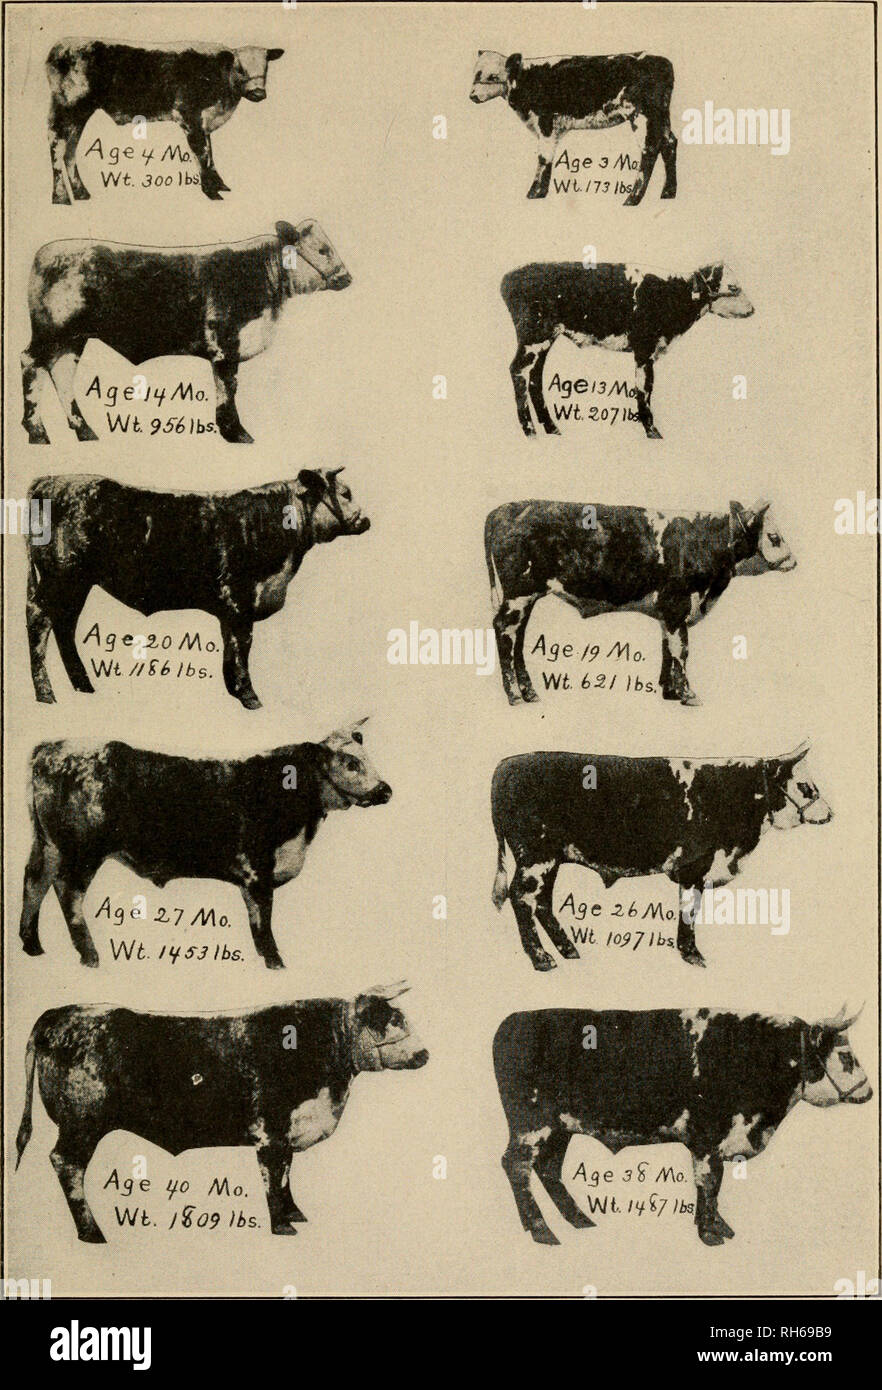 The breeding of animals. Livestock. Plate XXV. — Permanent effect of  retarded growth. The animal on the left (No. 527) was fed the maximum  amount of a nutritious ration from birth.